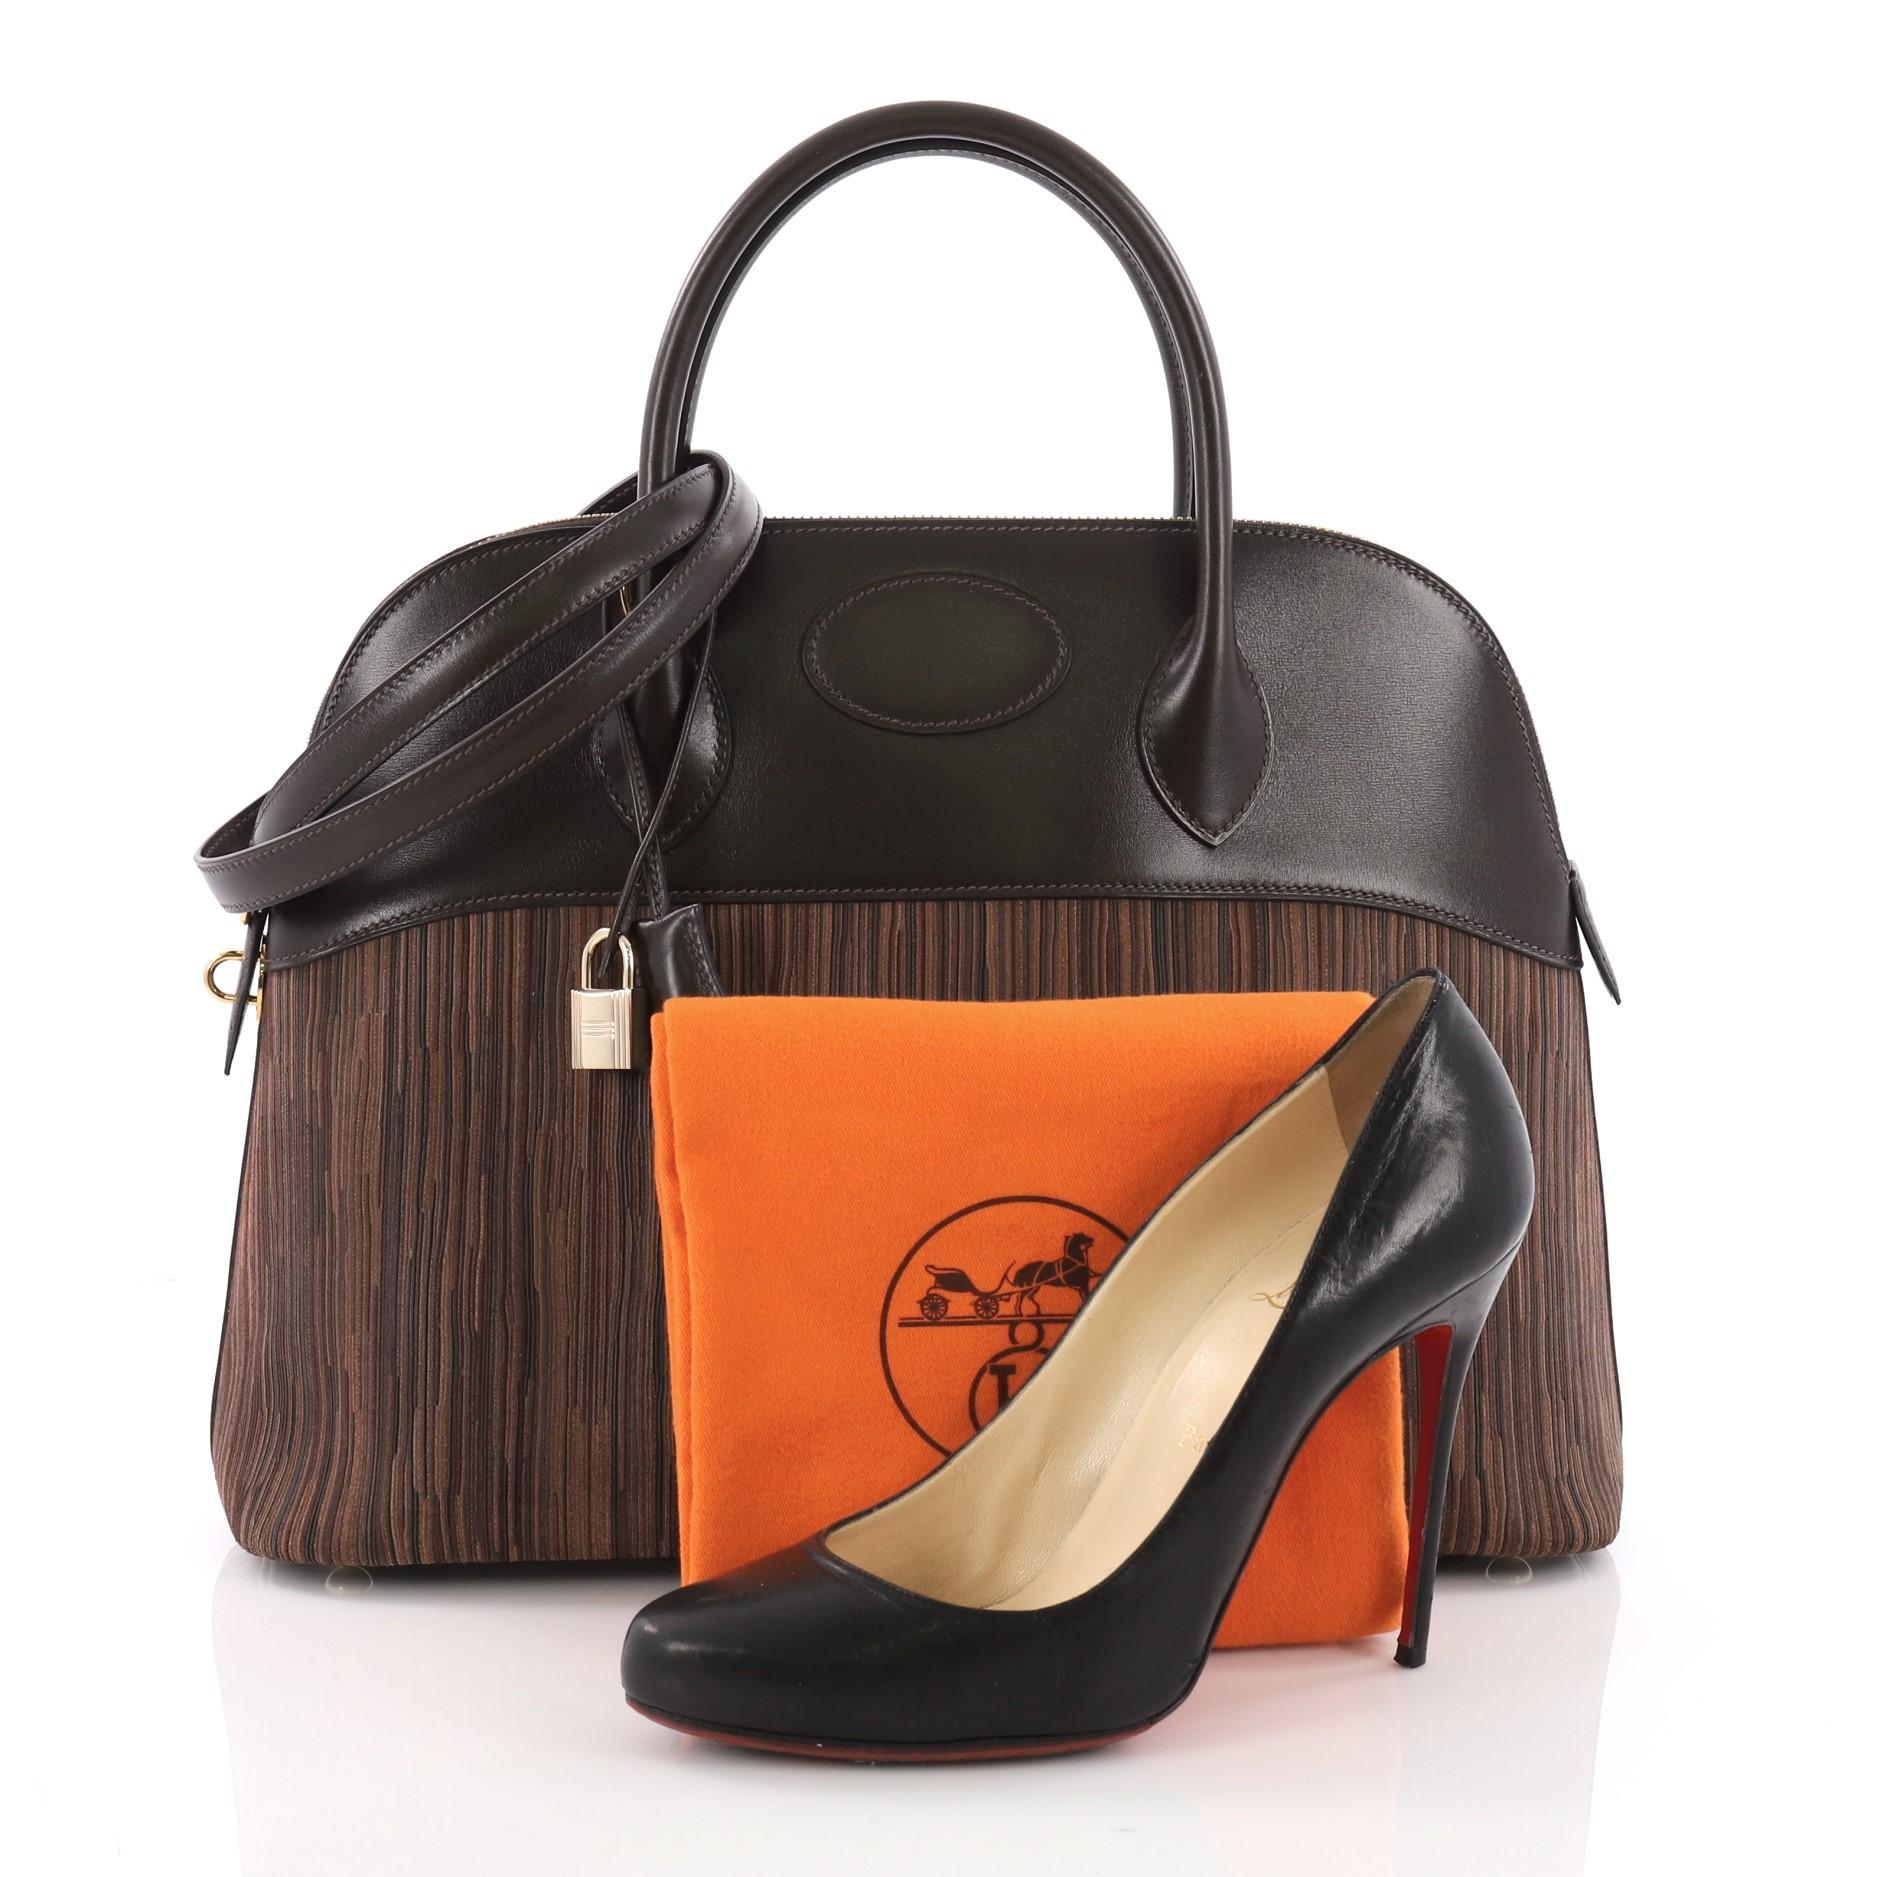 This Hermes Bolide Handbag Vibrato and Box Calf 35, crafted from brown leather and Vibrato, features dual rolled leather handles, and gold-tone hardware. Its zip closure opens to a brown leather interior with slip pocket. Date stamp reads: H Square